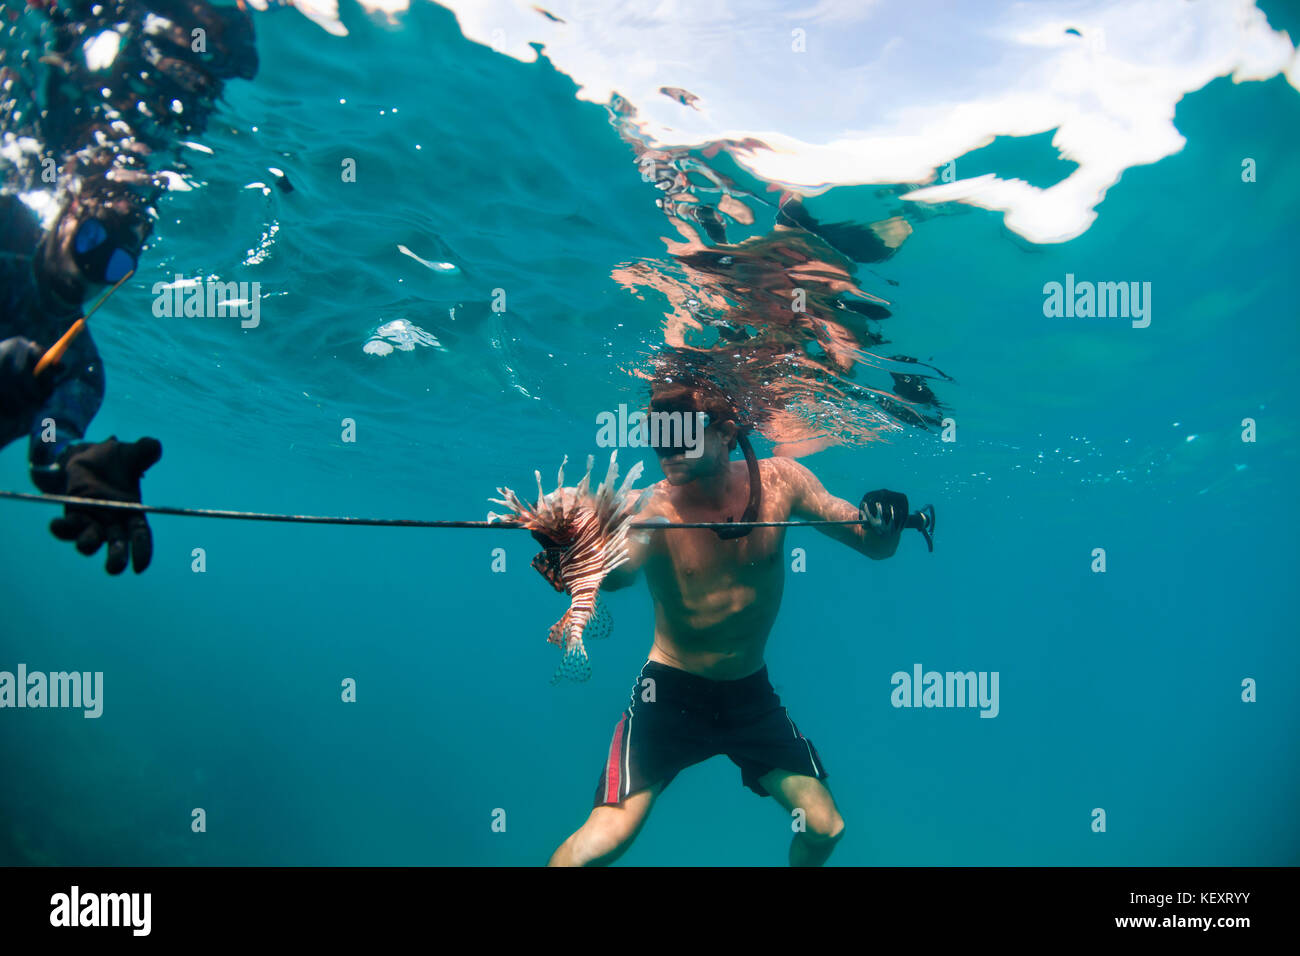 A man handles a speared Lionfish offshore of Belize.The Lionfish is an invasive species that is hurting the ecology of coral reefs throughout the Caribbean. The fish's spines are venomous, so divers cut the spines off to avoid injury. Stock Photo